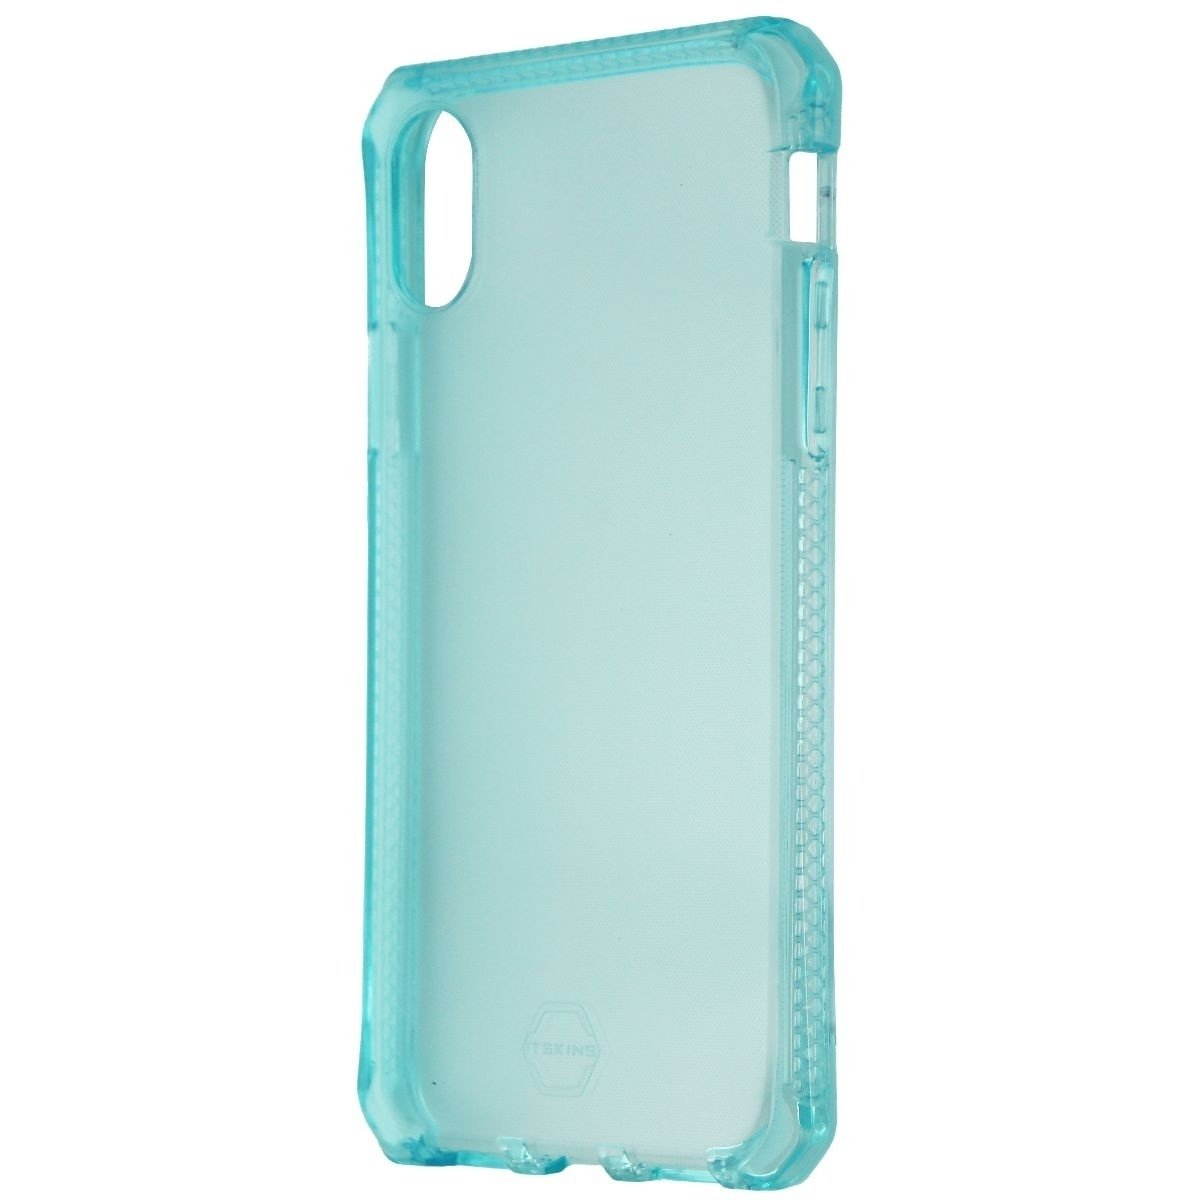 Itskins Spectrum Series Case For Apple IPhone Xs And X - Translucent Blue